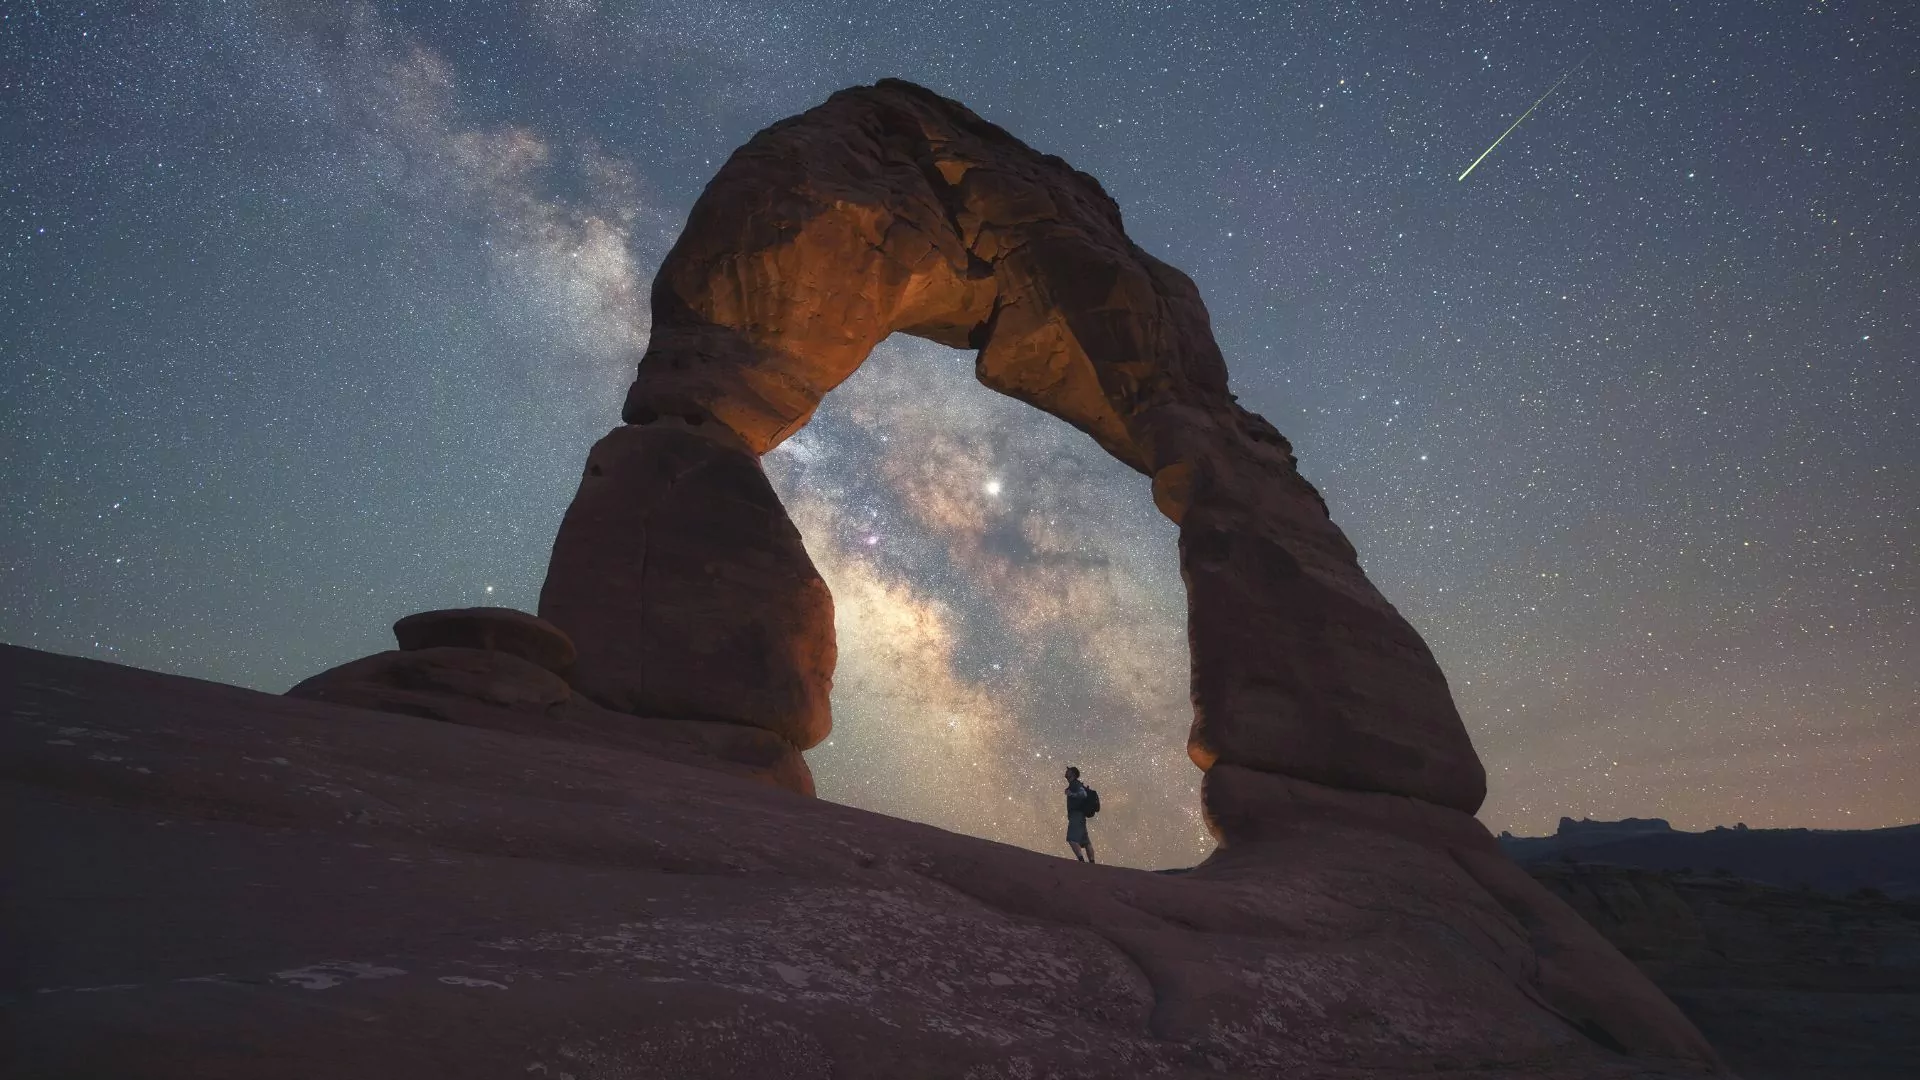 Arches Dark Sky Park stargazing at Delicate Arch